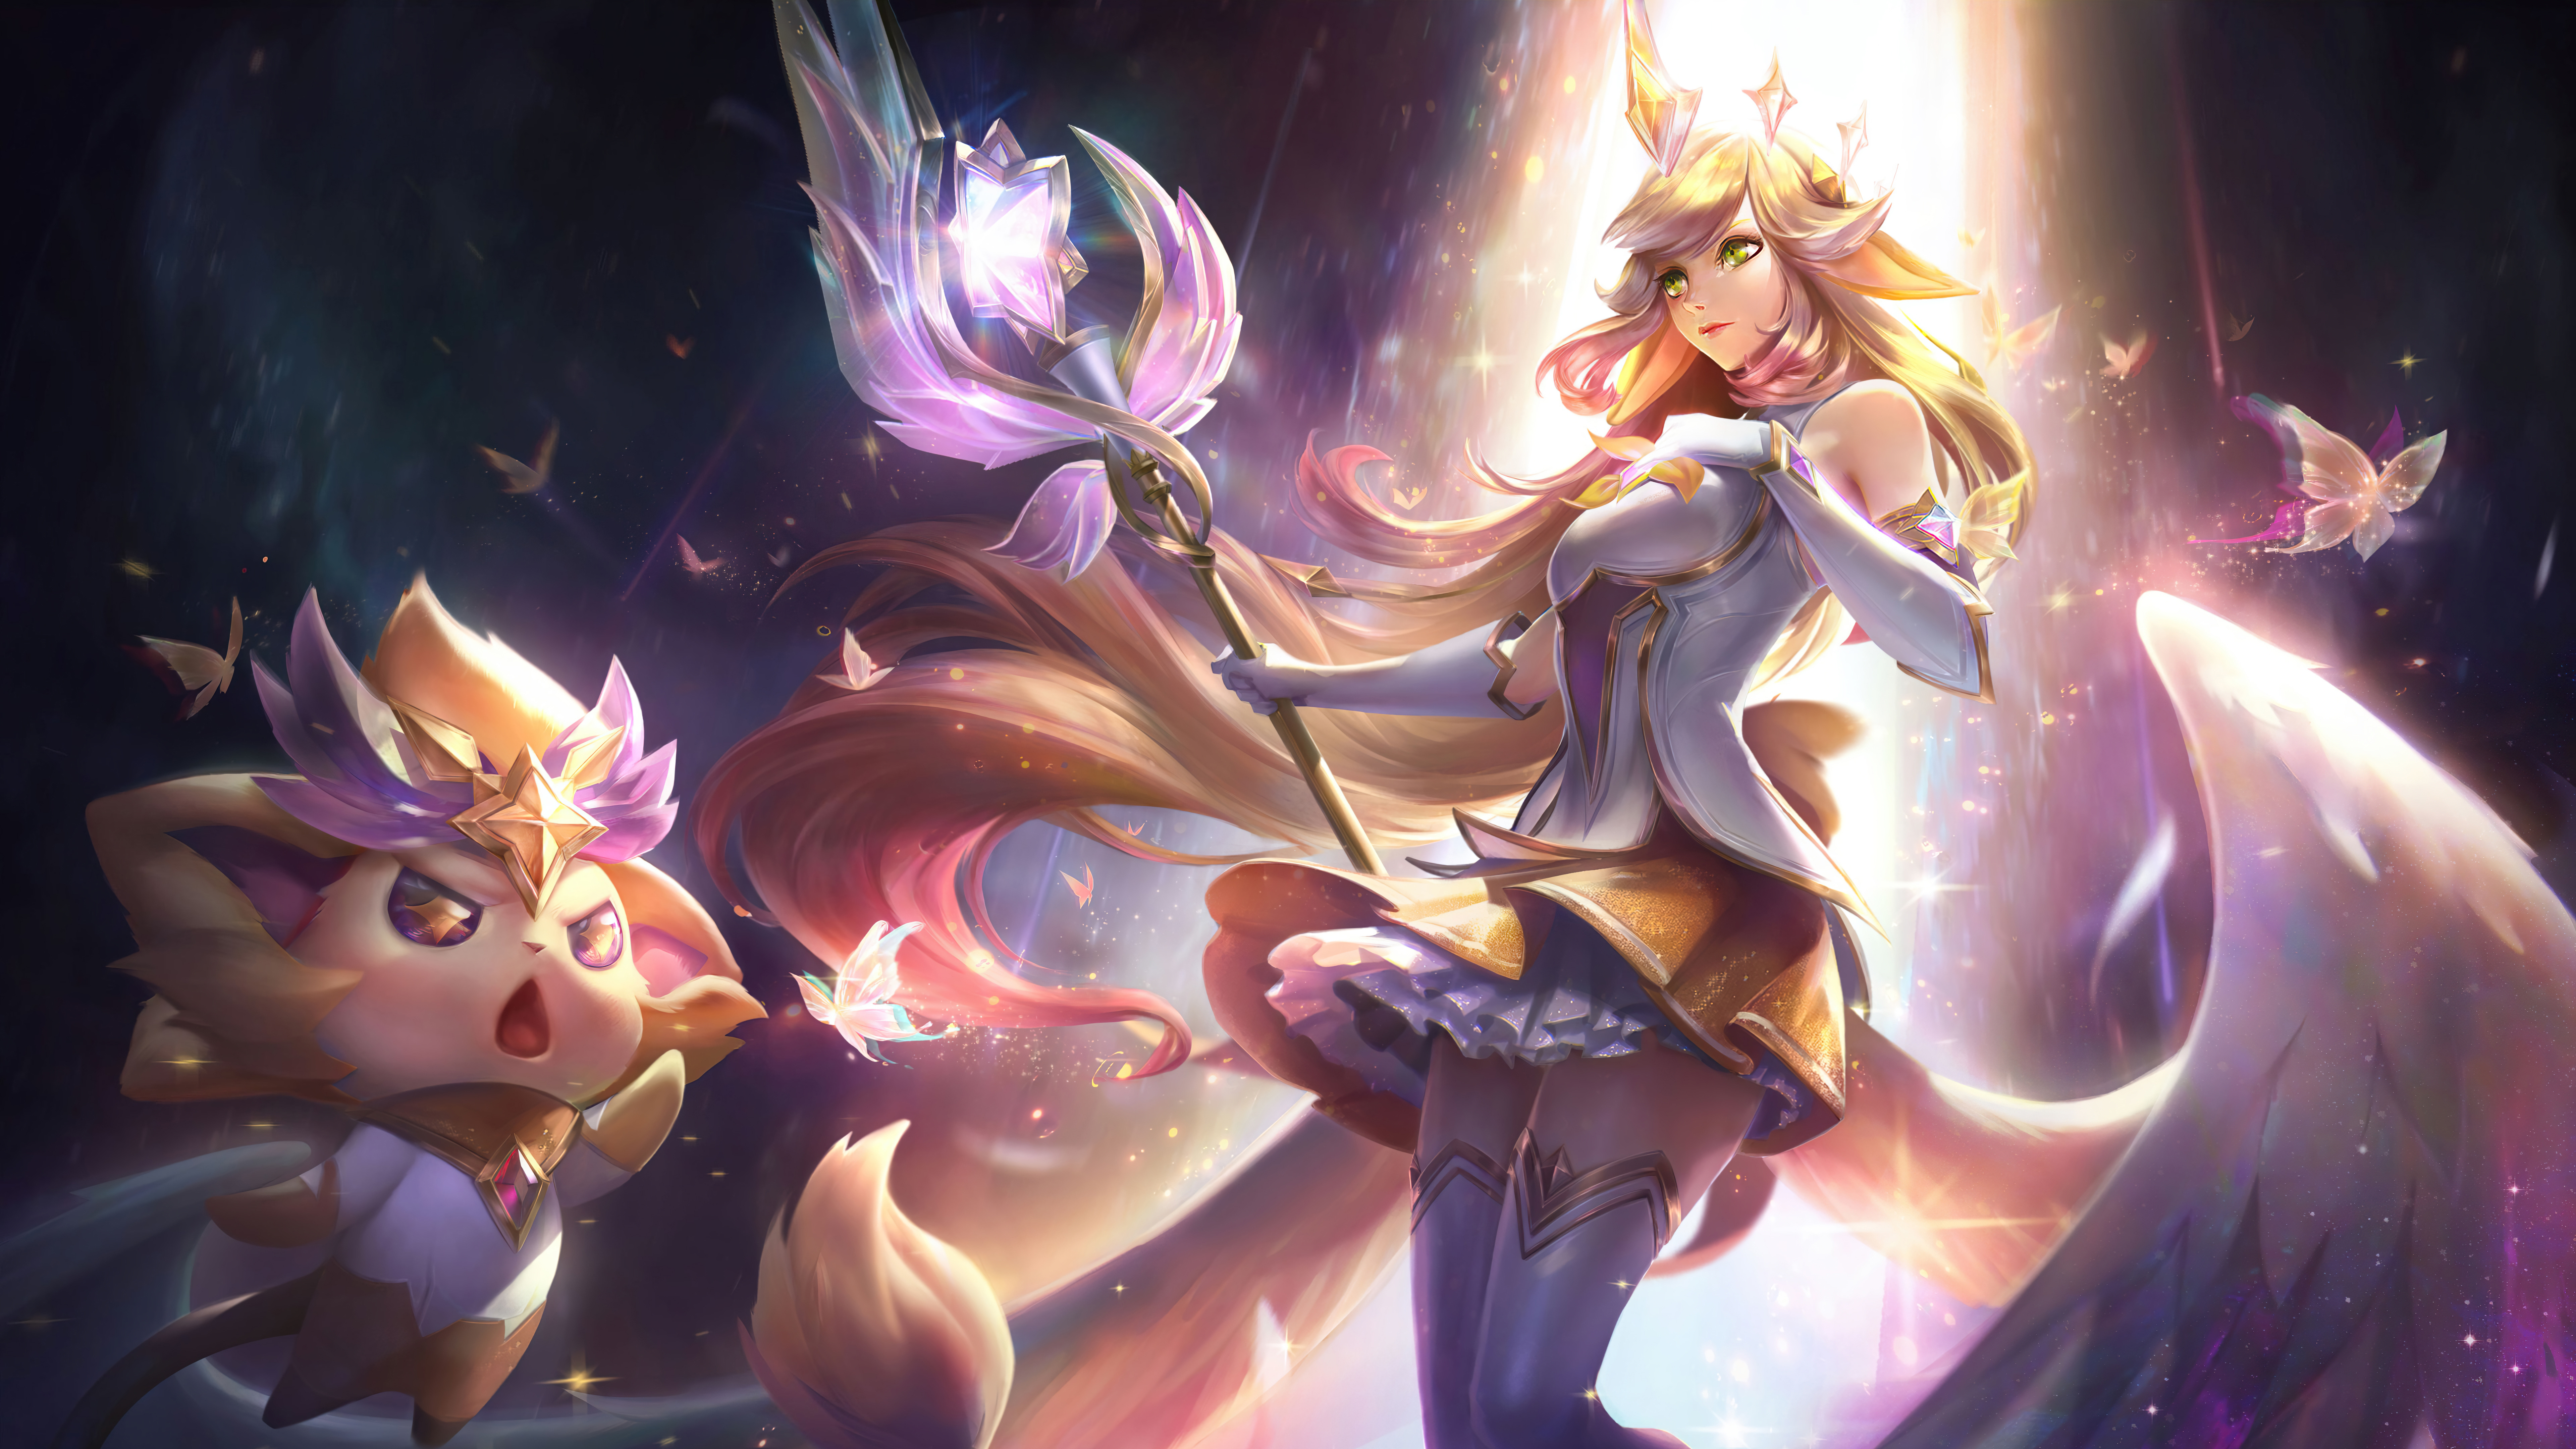 General 7680x4320 Star Guardian Soraka (League of Legends) League of Legends Riot Games Support (League Of Legends) supporters stars 4K GZG Prestige Edition (League of Legends) Star Guardian (League of Legends) video games video game characters